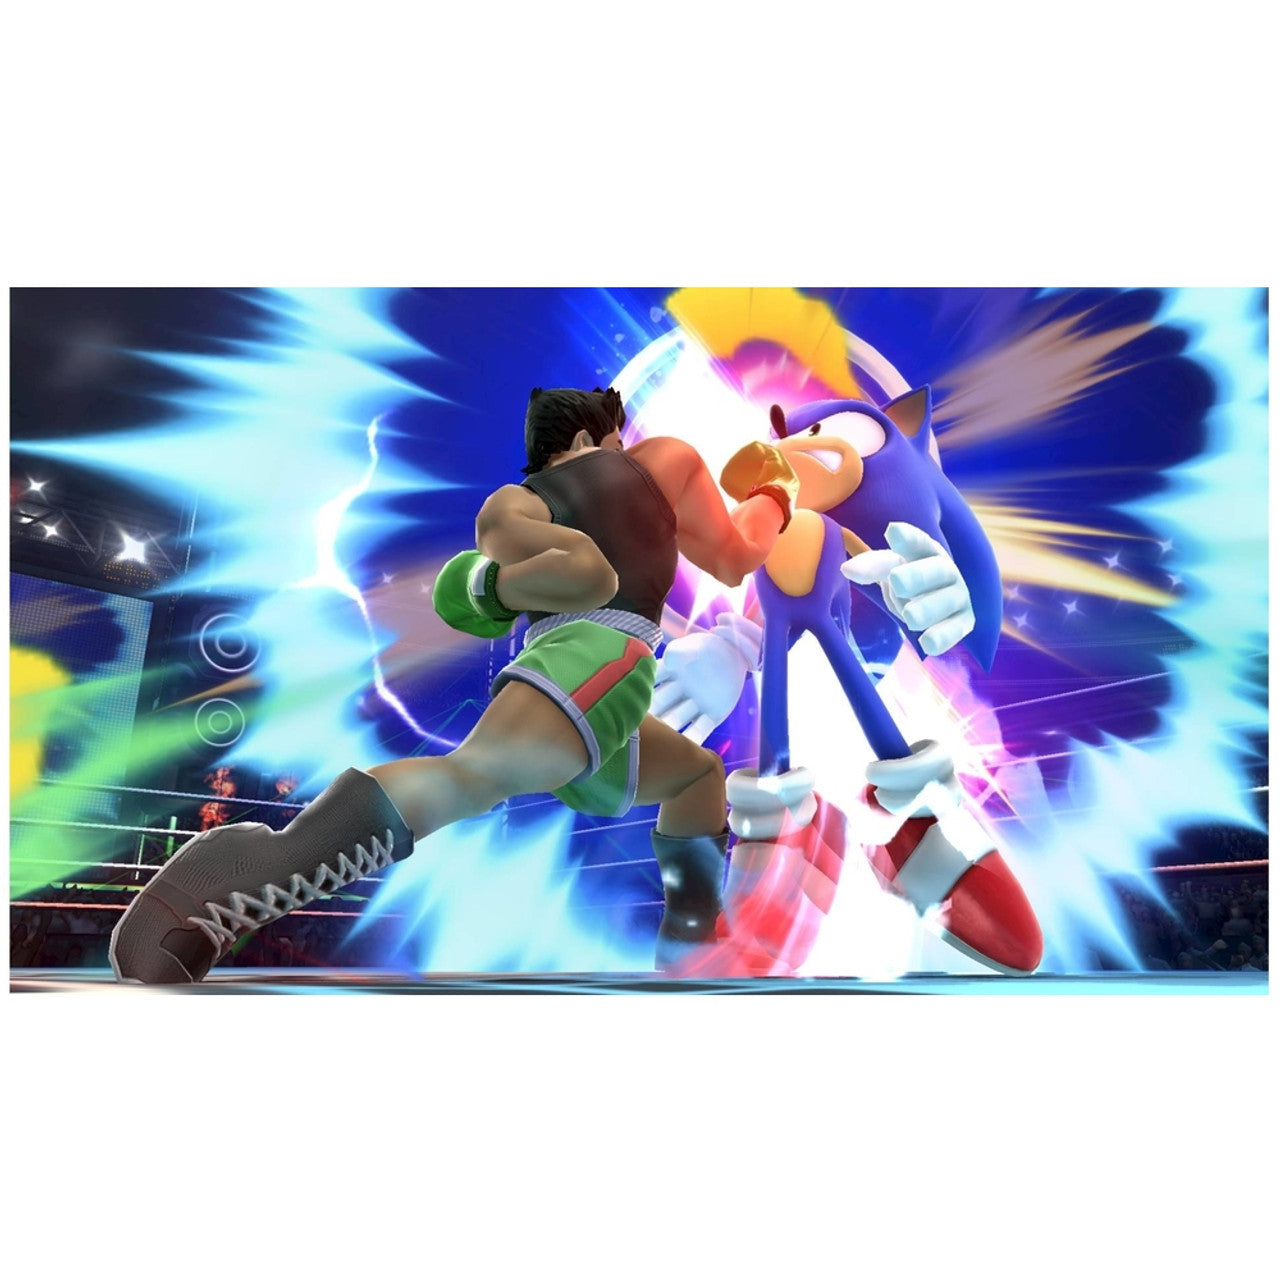 Product Image : This is brand new.<br>Battle it out as Nintendo’s greatest heroes on the Wii U console

Face off against the biggest roster of Nintendo all-stars ever assembled! Send your rivals flying with powerful attacks to earn all-new customizations and equipment that trick out your fighter’s moves and stats. Then power-up and train intelligent amiibo figures* to take on your friends!

The multiplayer showdown** you know and love is now on the Wii U console! Take on all comers as Mario, Mega Man, Sonic